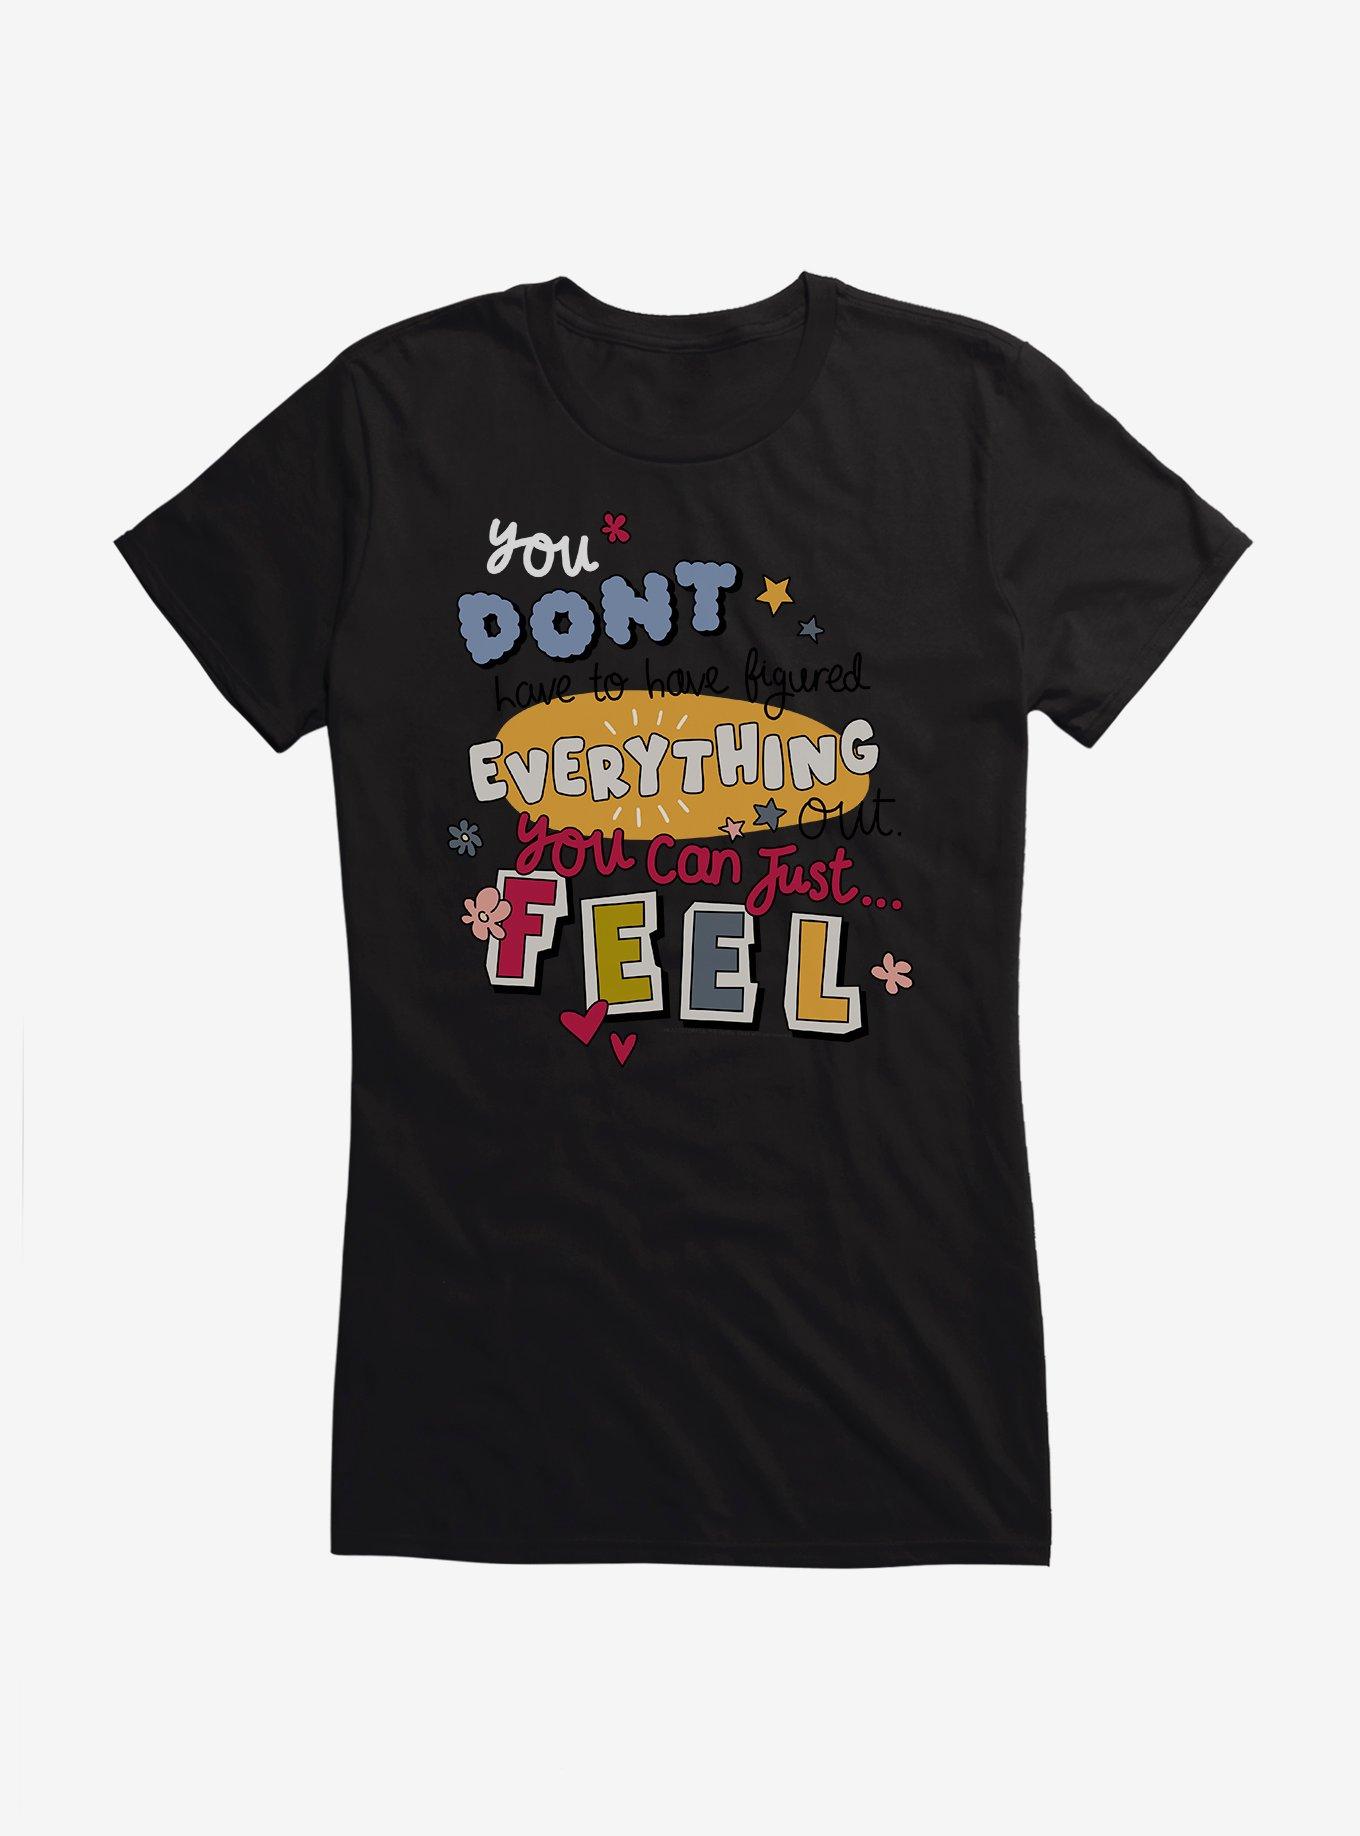 Heartstopper You Can Just Feel Girls T-Shirt